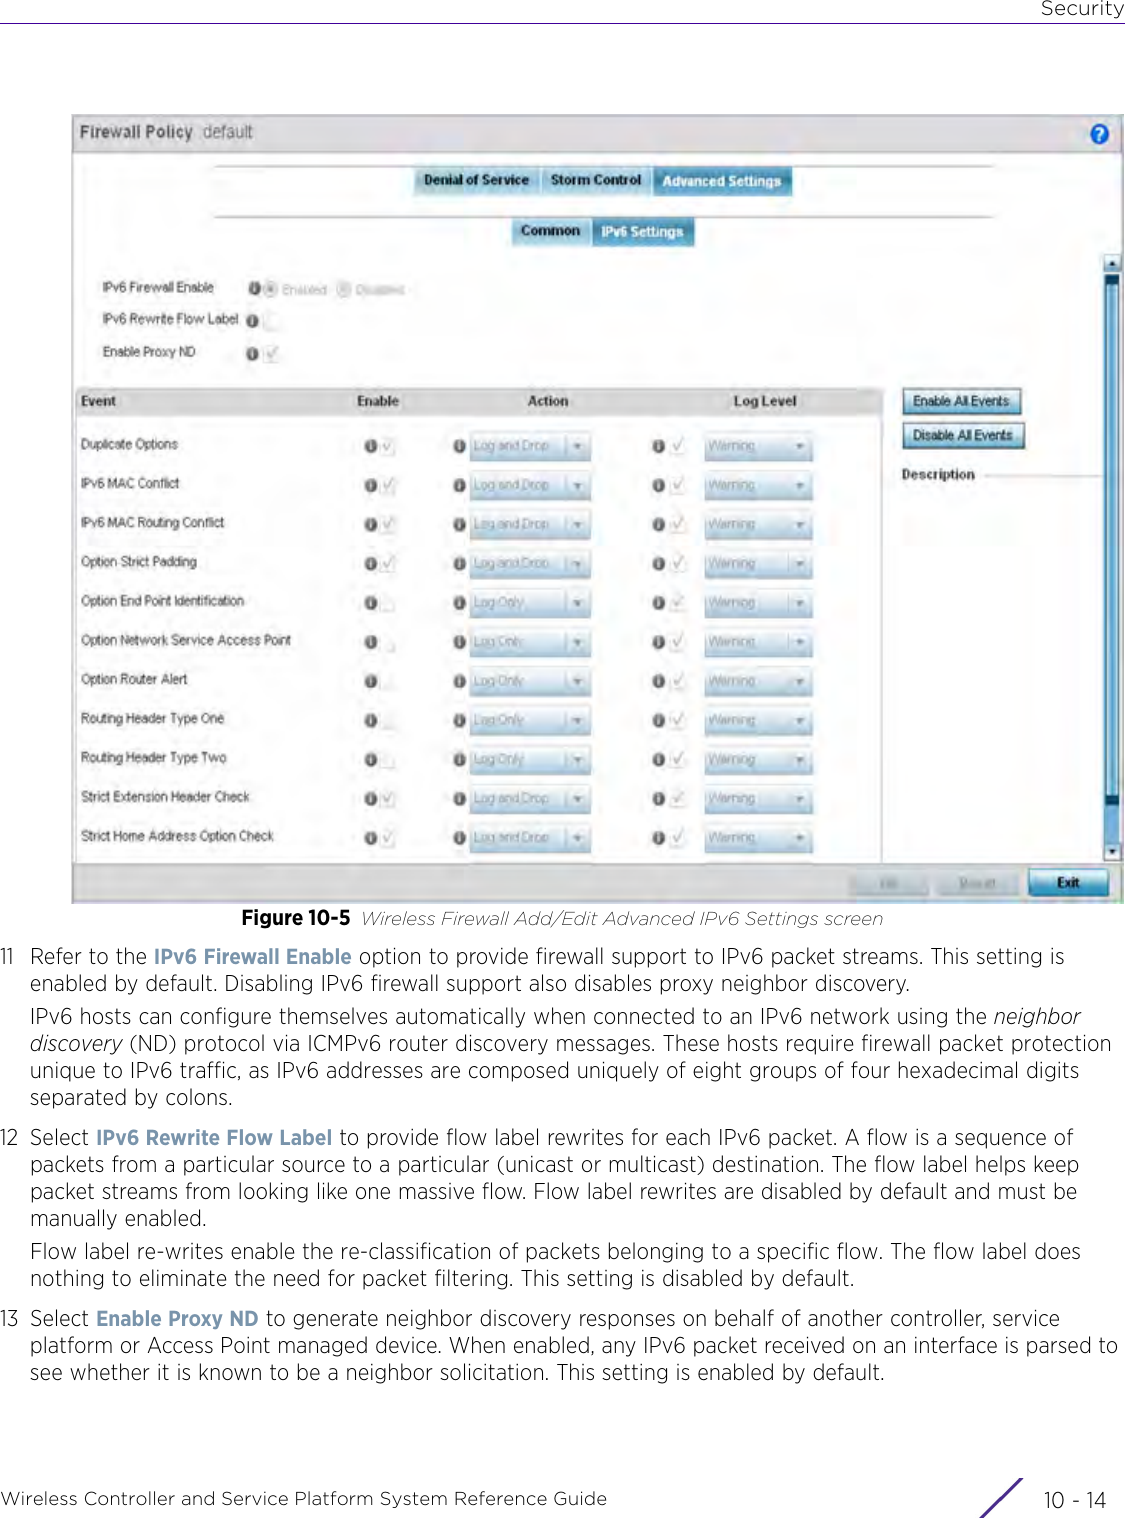 SecurityWireless Controller and Service Platform System Reference Guide  10 - 14Figure 10-5 Wireless Firewall Add/Edit Advanced IPv6 Settings screen11 Refer to the IPv6 Firewall Enable option to provide firewall support to IPv6 packet streams. This setting is enabled by default. Disabling IPv6 firewall support also disables proxy neighbor discovery. IPv6 hosts can configure themselves automatically when connected to an IPv6 network using the neighbor discovery (ND) protocol via ICMPv6 router discovery messages. These hosts require firewall packet protection unique to IPv6 traffic, as IPv6 addresses are composed uniquely of eight groups of four hexadecimal digits separated by colons.12 Select IPv6 Rewrite Flow Label to provide flow label rewrites for each IPv6 packet. A flow is a sequence of packets from a particular source to a particular (unicast or multicast) destination. The flow label helps keep packet streams from looking like one massive flow. Flow label rewrites are disabled by default and must be manually enabled.Flow label re-writes enable the re-classification of packets belonging to a specific flow. The flow label does nothing to eliminate the need for packet filtering. This setting is disabled by default.13 Select Enable Proxy ND to generate neighbor discovery responses on behalf of another controller, service platform or Access Point managed device. When enabled, any IPv6 packet received on an interface is parsed to see whether it is known to be a neighbor solicitation. This setting is enabled by default.